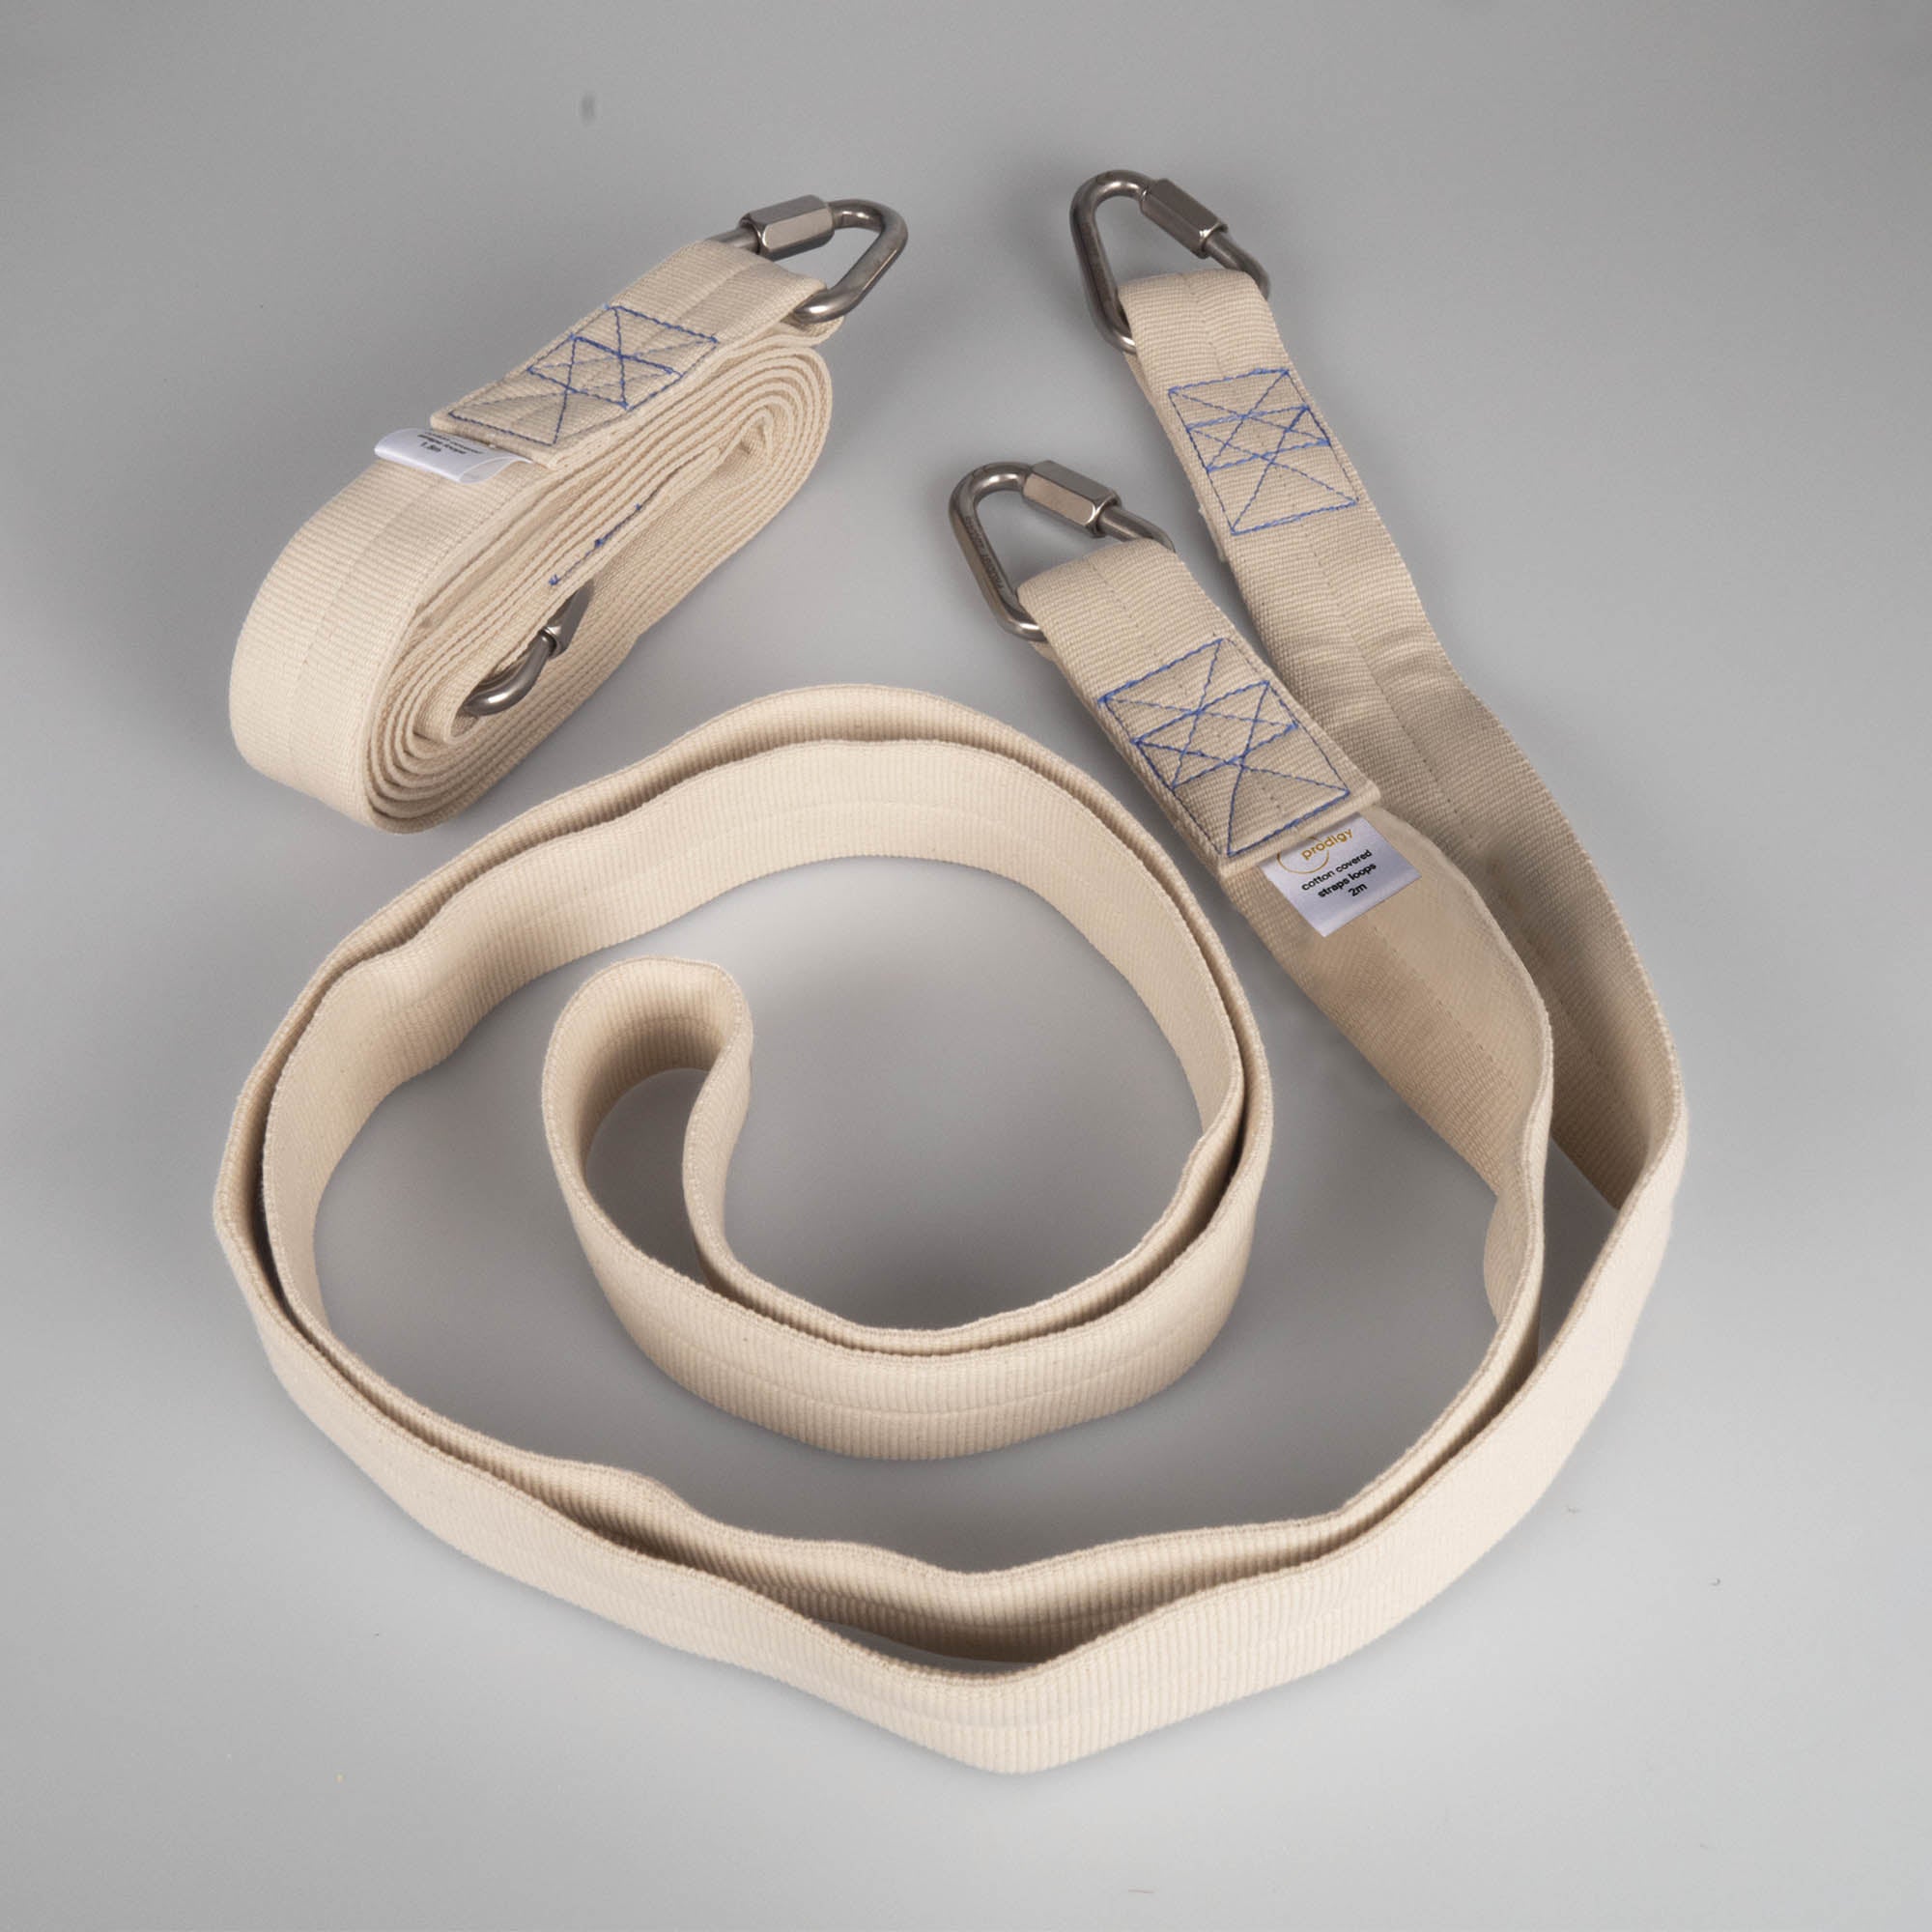 Pair of Prodigy cotton covered aerial loops, one undone other coiled up